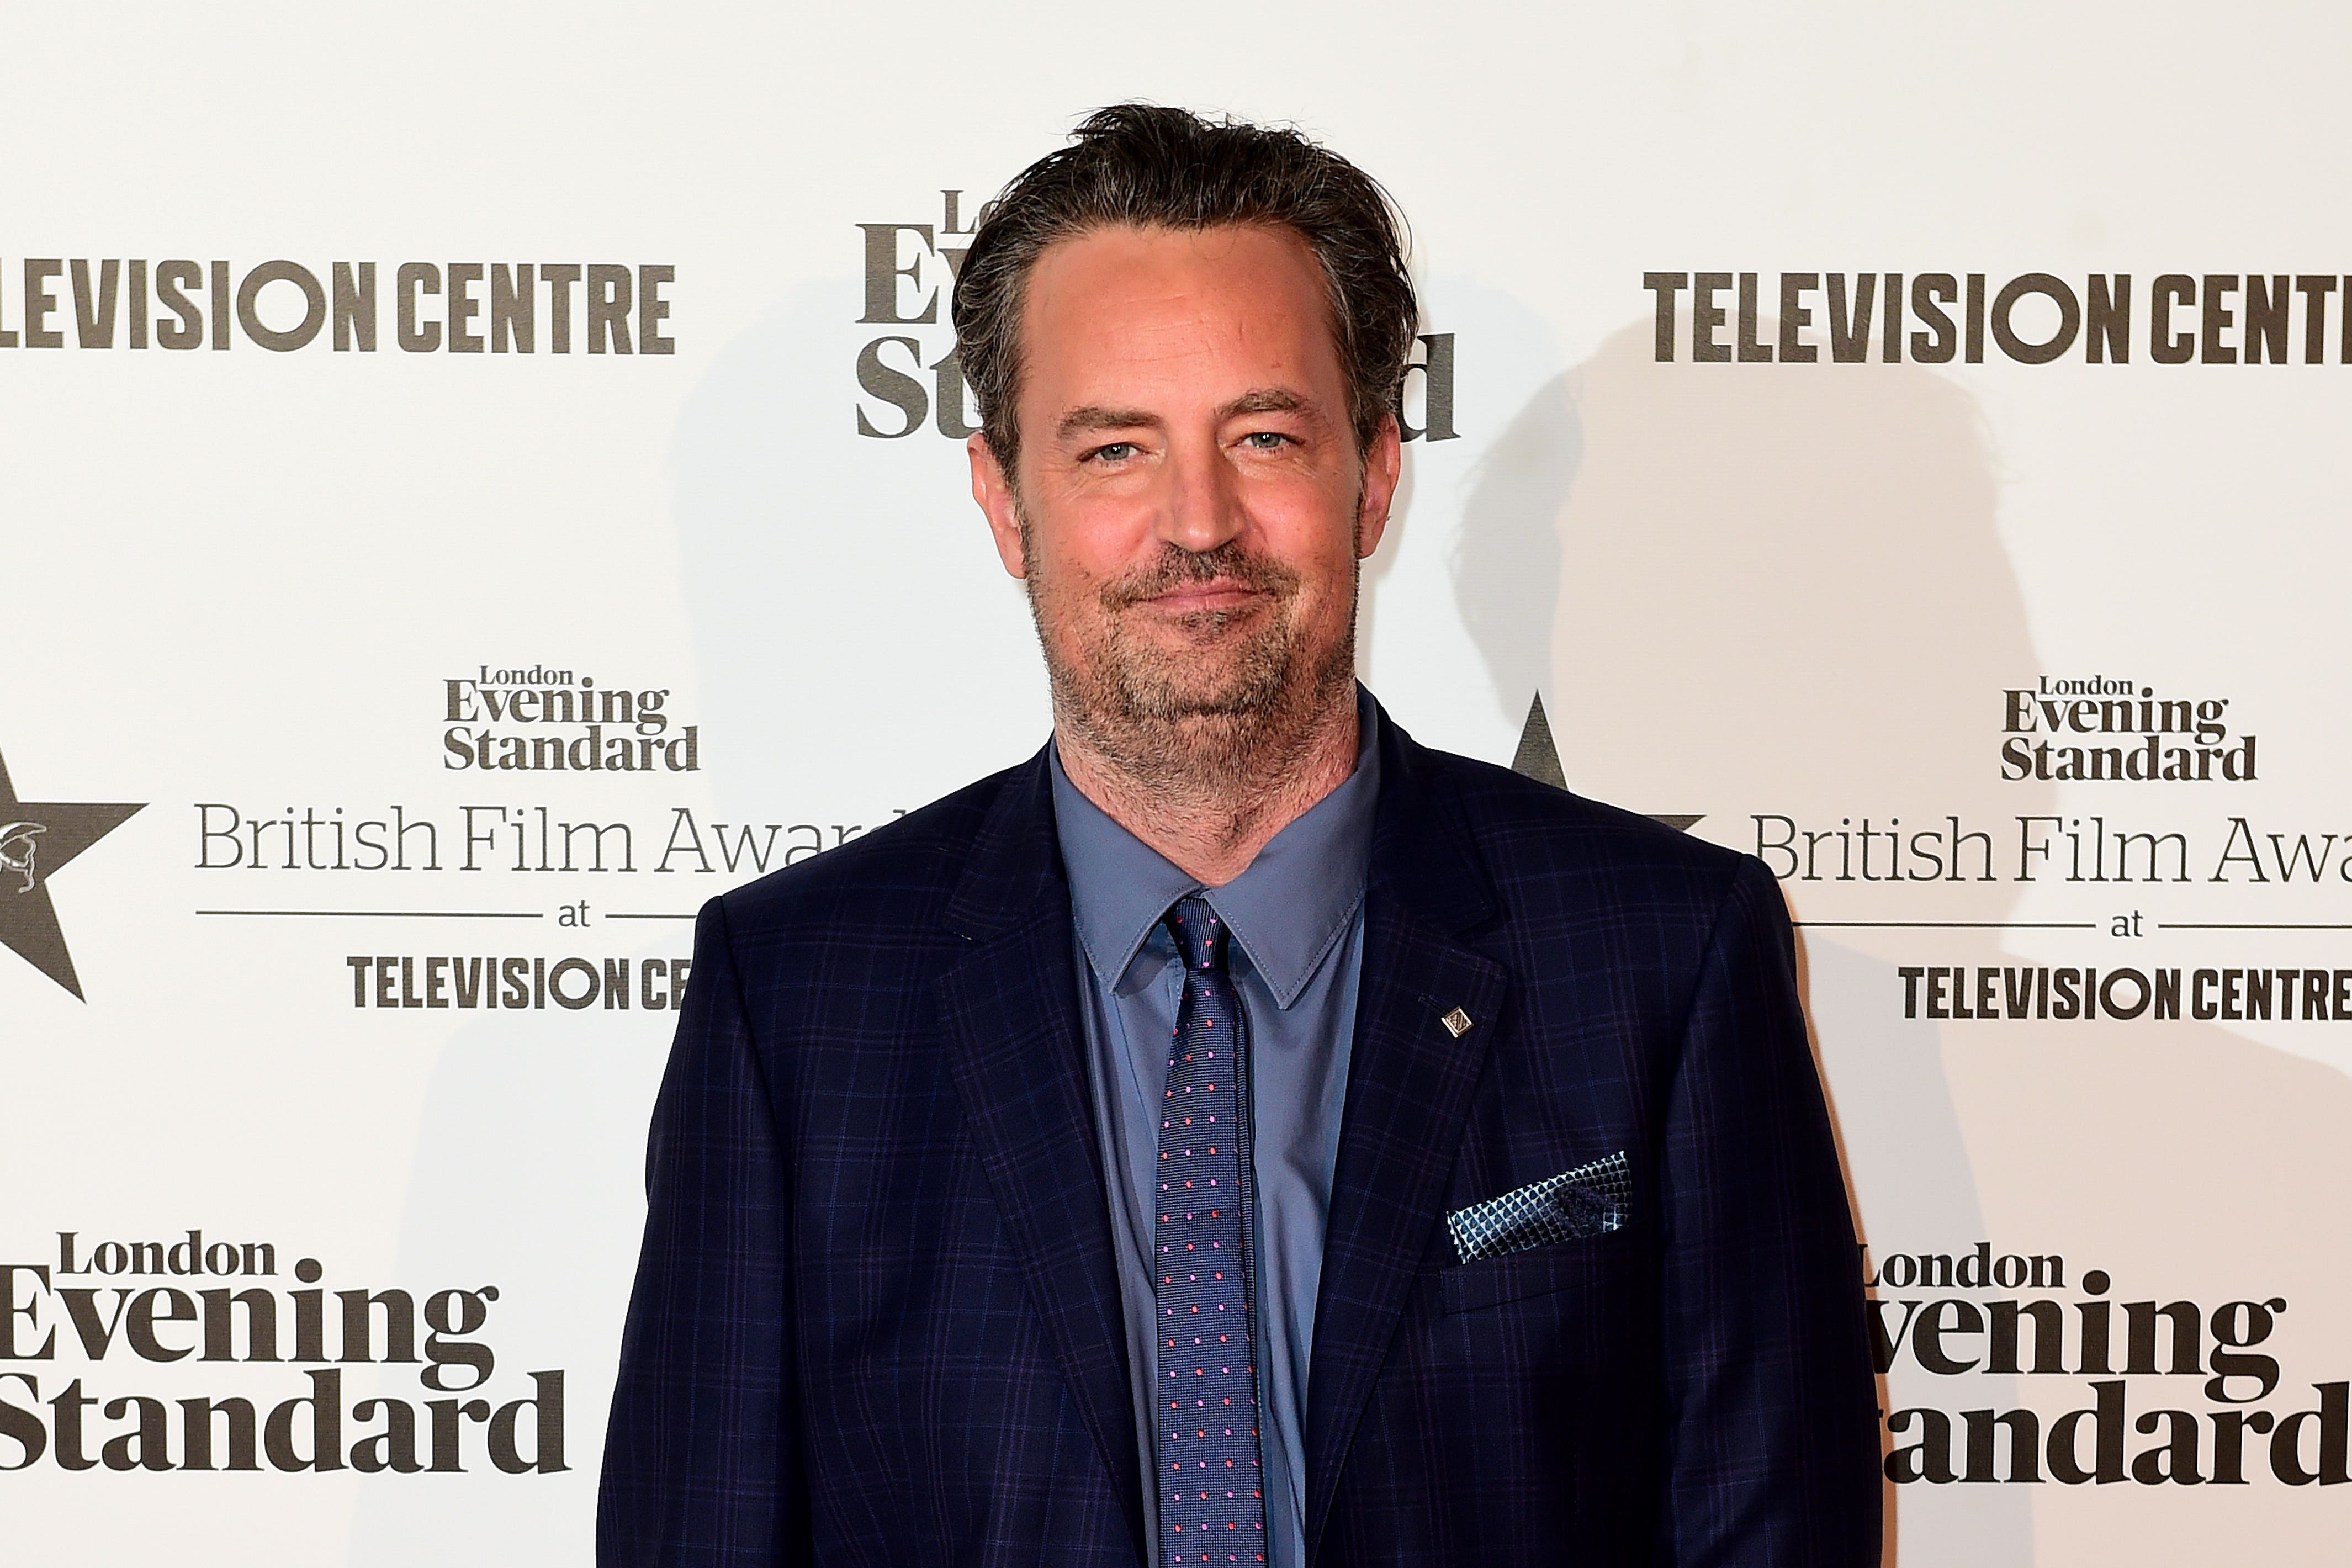 Matthew Perry’s stepfather Keith Morrison encouraged fans to donate to the foundation for Giving Tuesday